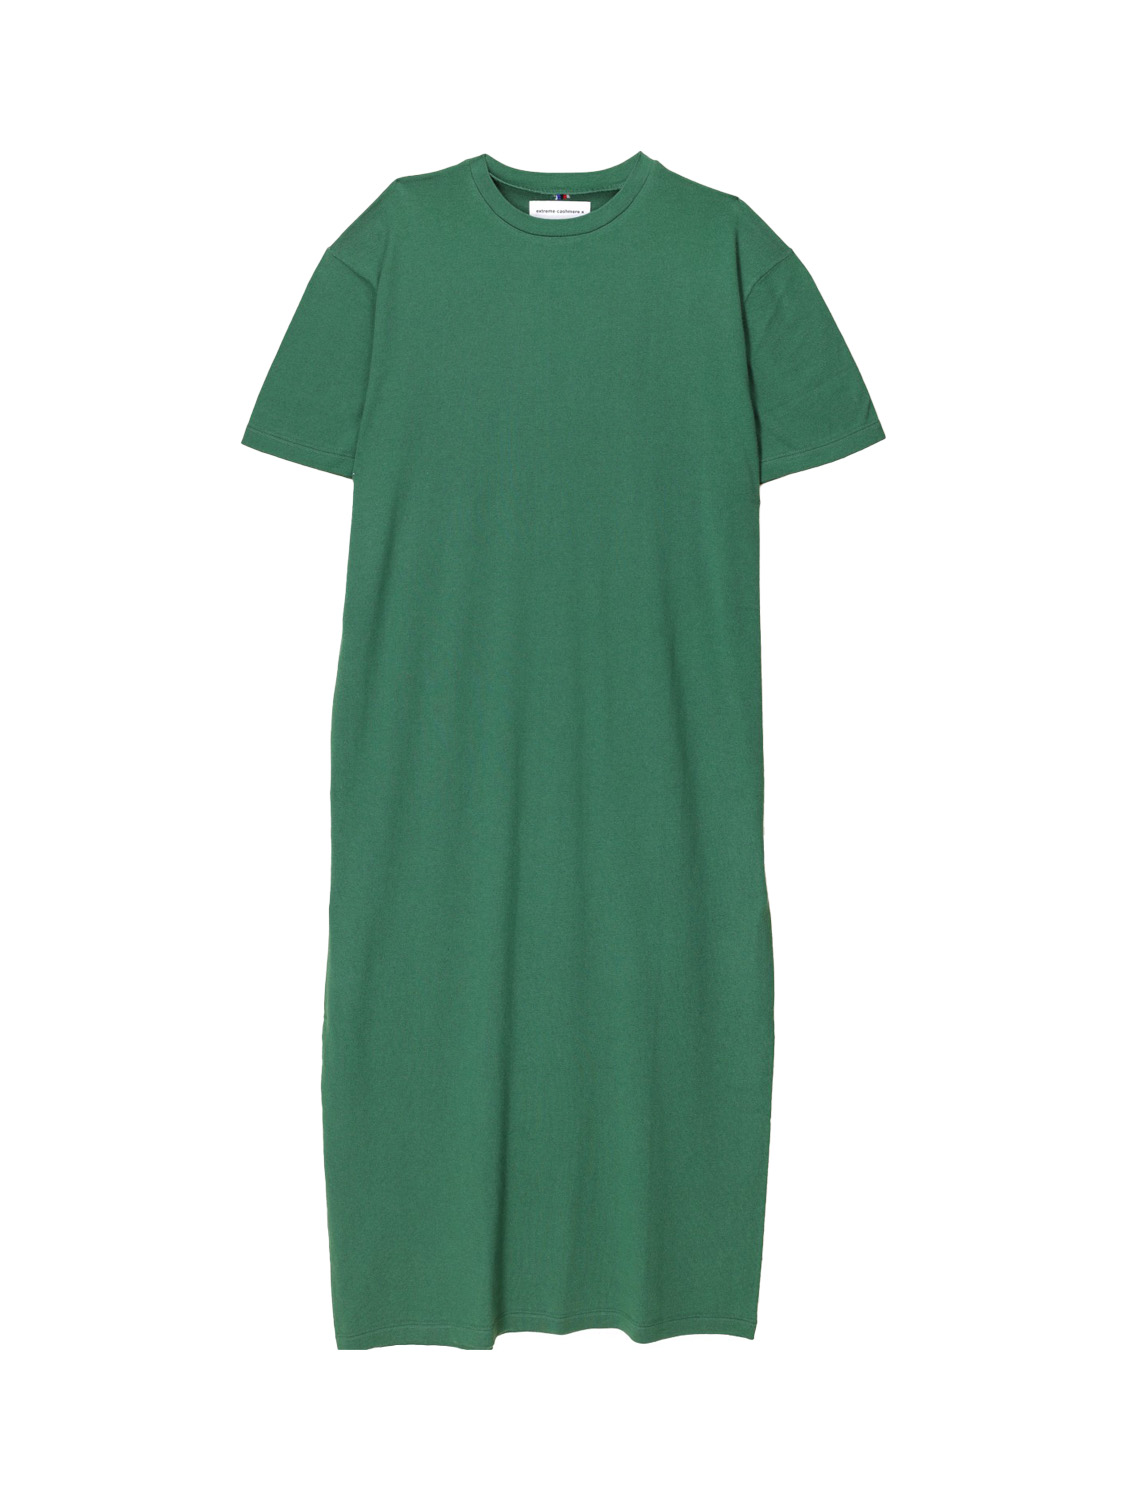 Extreme Cashmere N°321 Kris - Oversized T-shirt dress in cashmere-cotton blend  green One Size